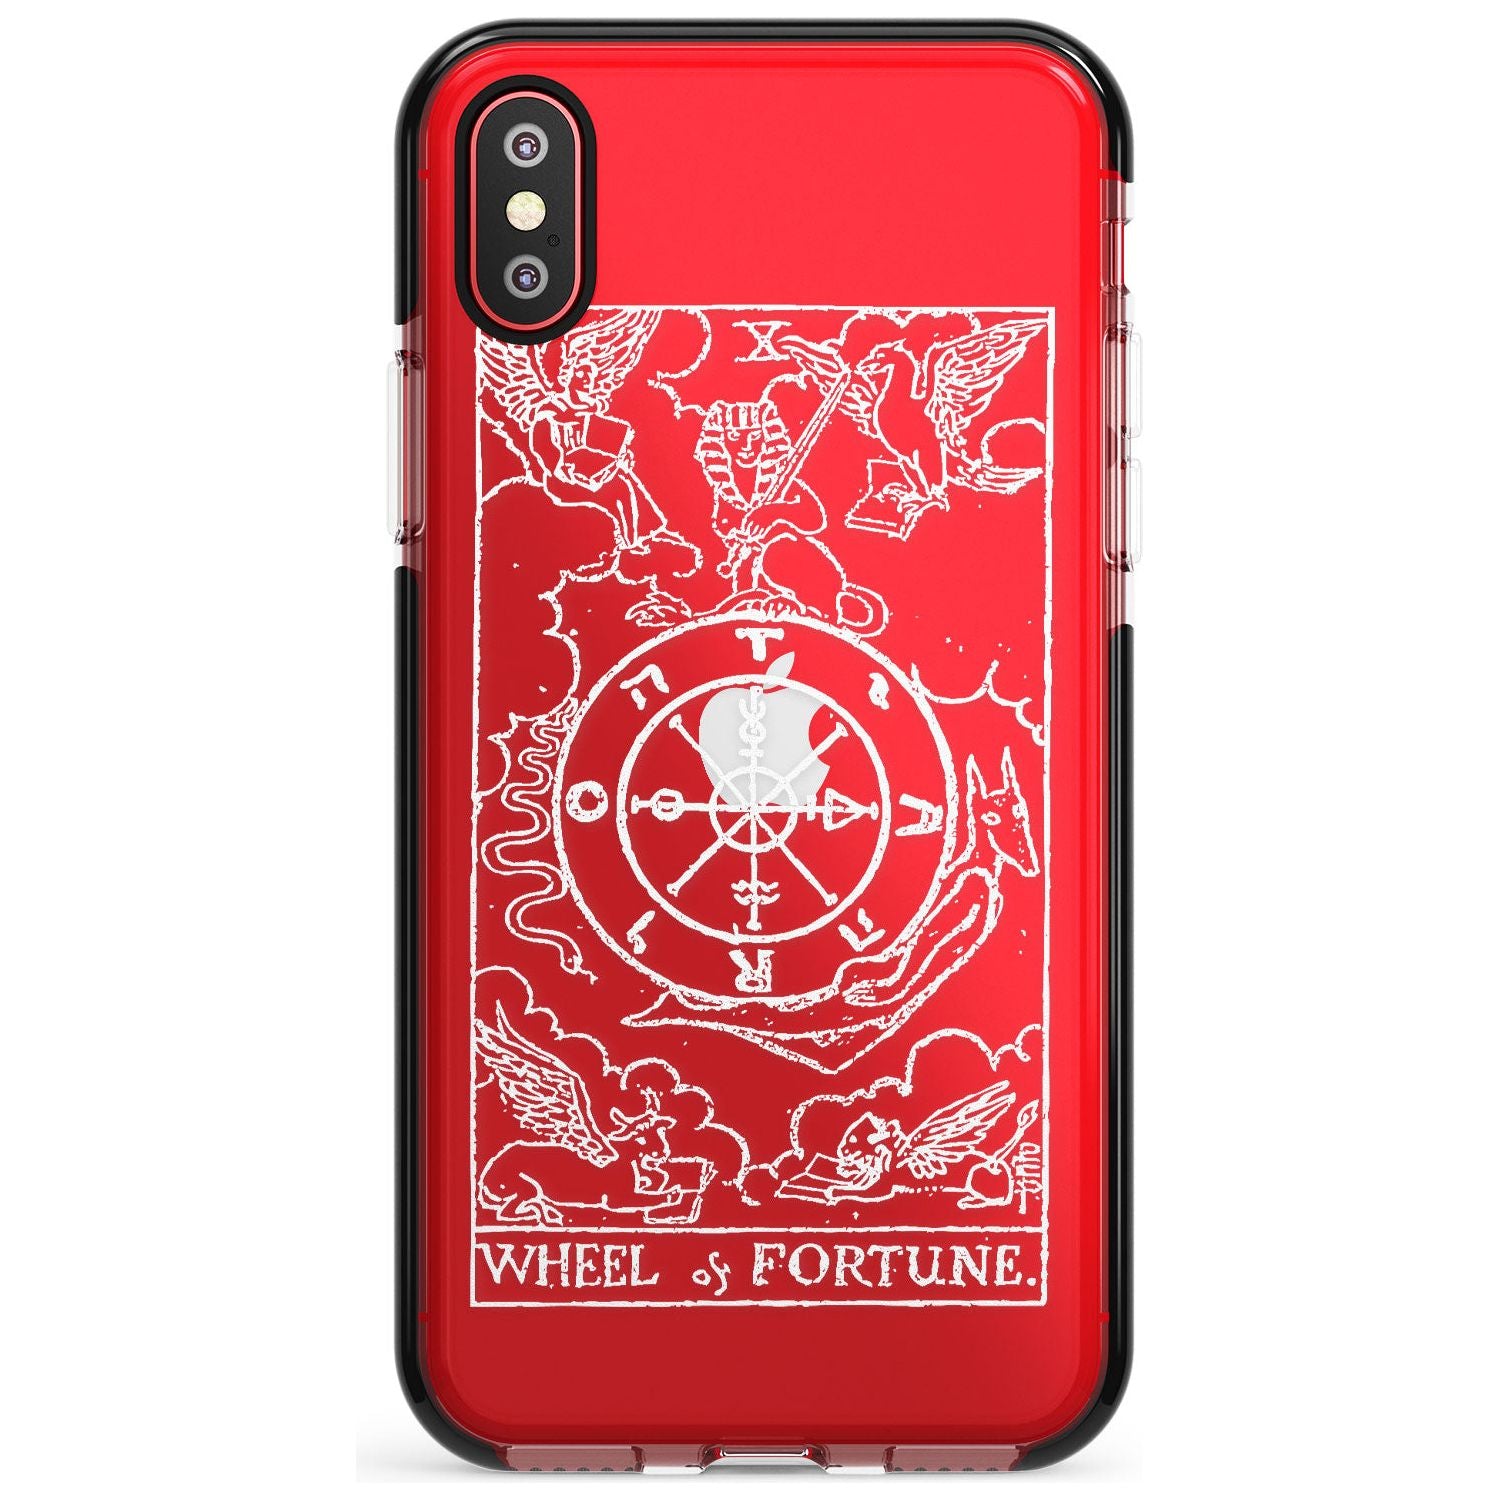 Wheel of Fortune Tarot Card - White Transparent Pink Fade Impact Phone Case for iPhone X XS Max XR